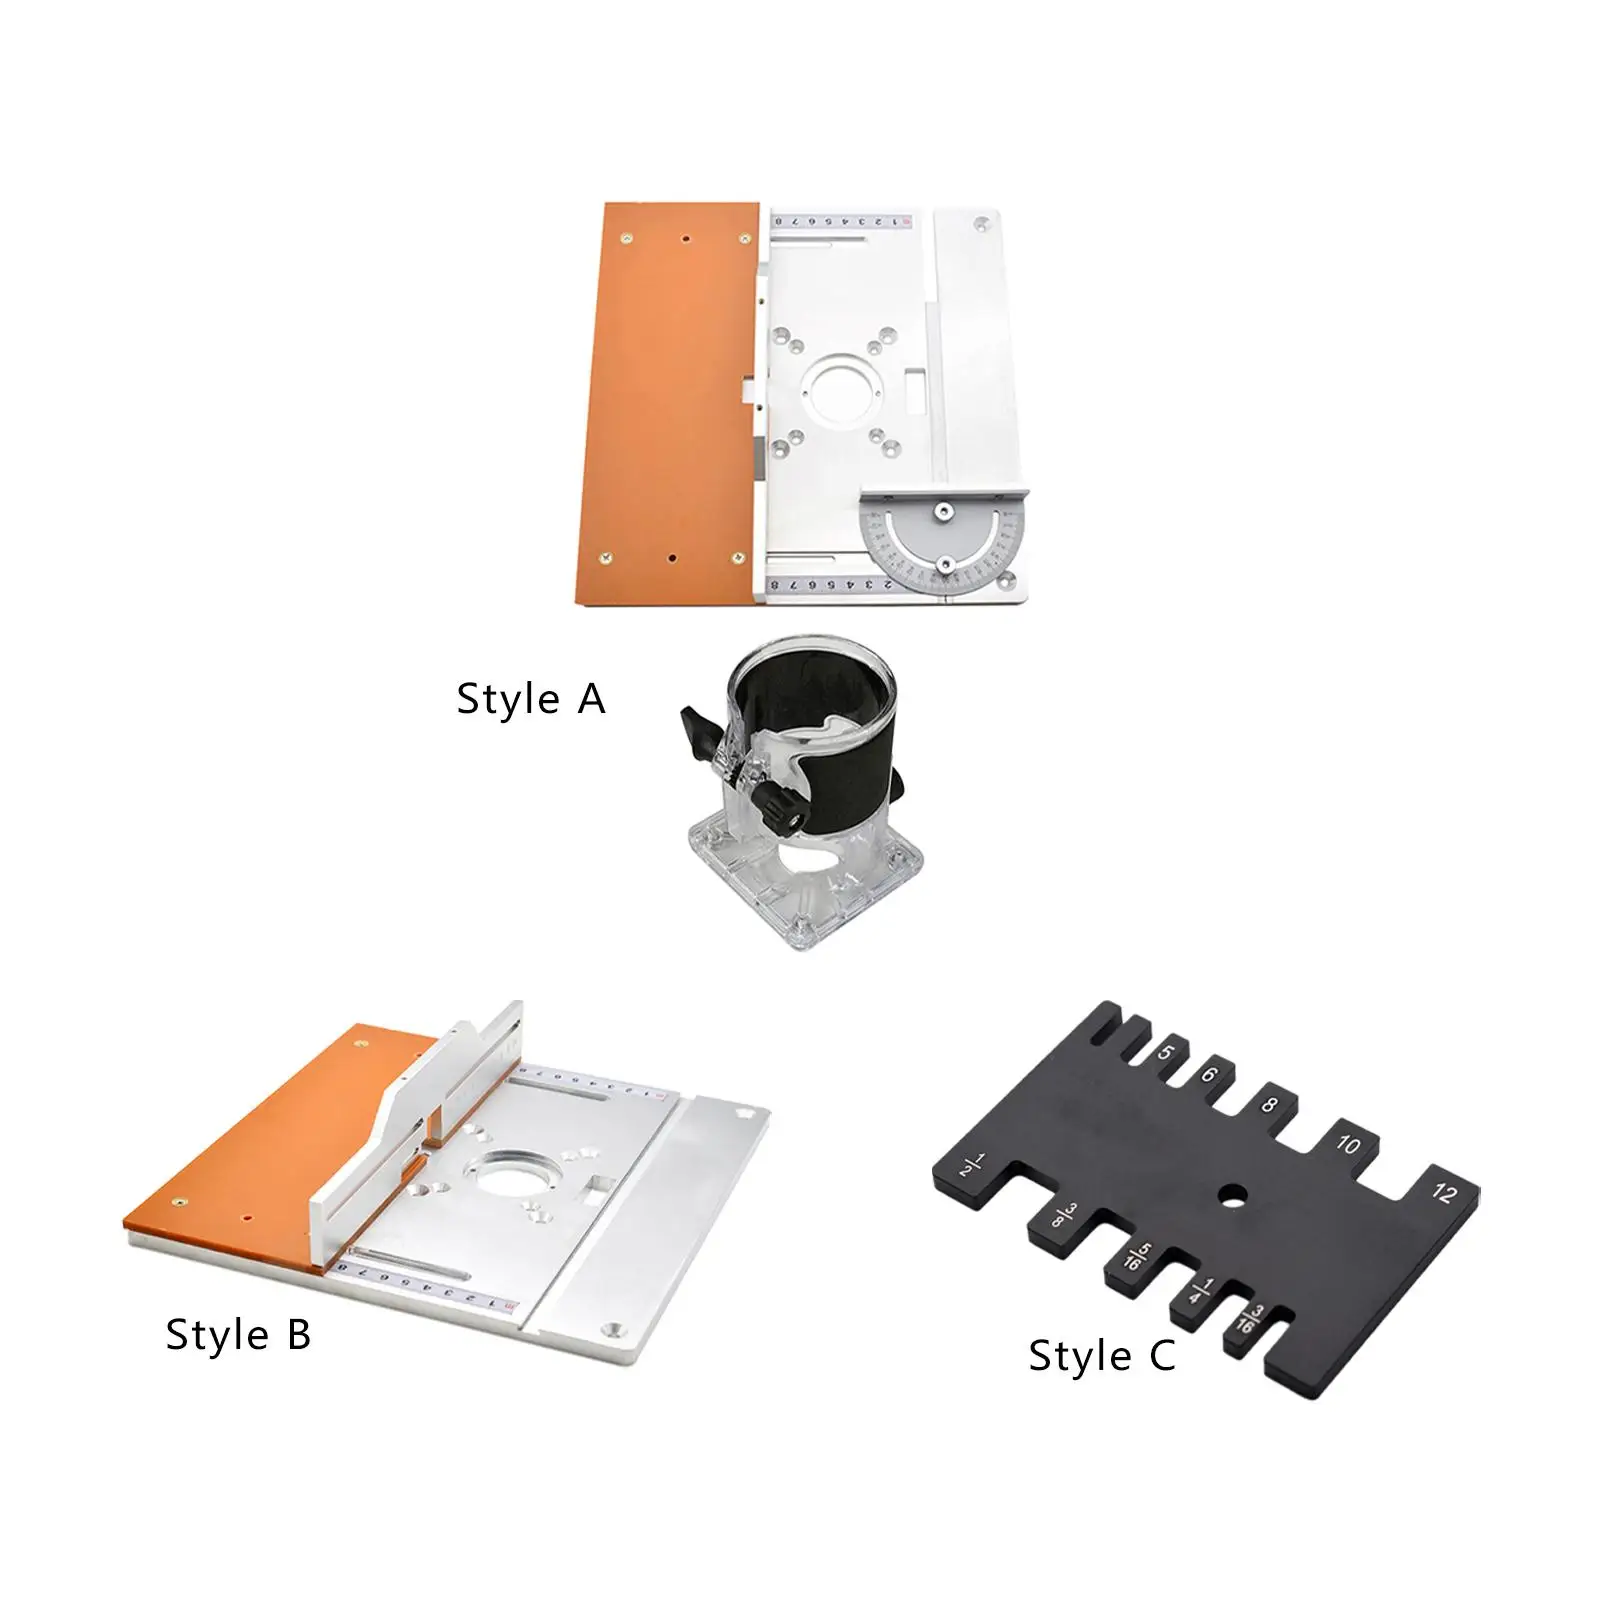 Aluminium Alloy Router Table Insert Plate Gauge Guide Multifunctional Flip Board Table Saw Woodworking Benches for Woodworking